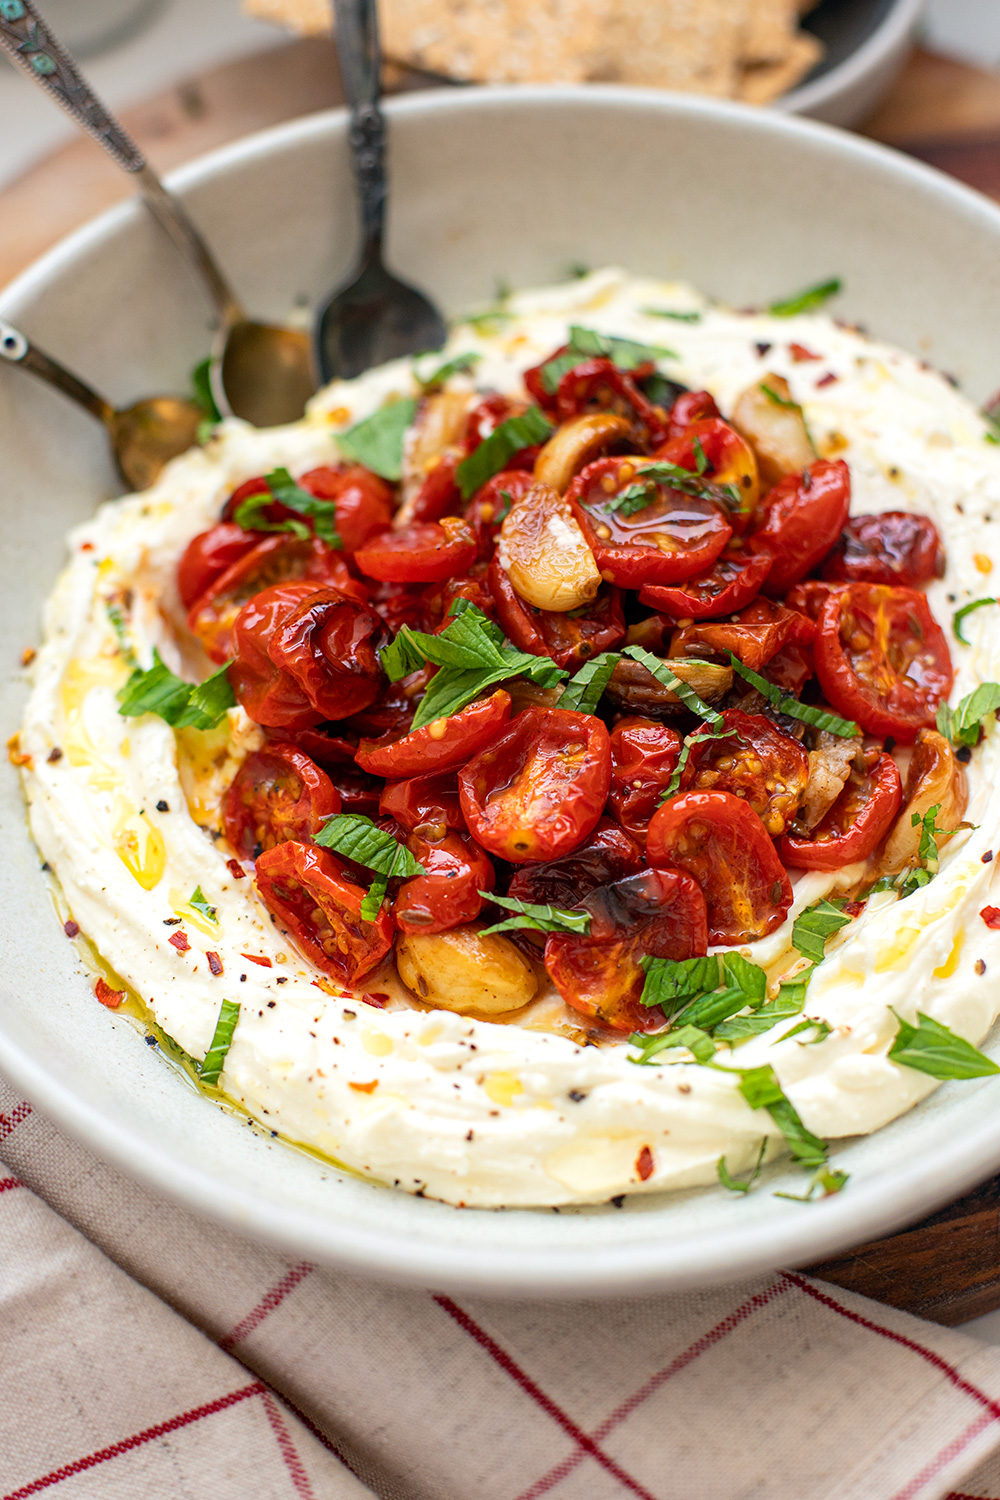 Whipped Feta Dip With Roasted Cherry Tomatoes & Garlic